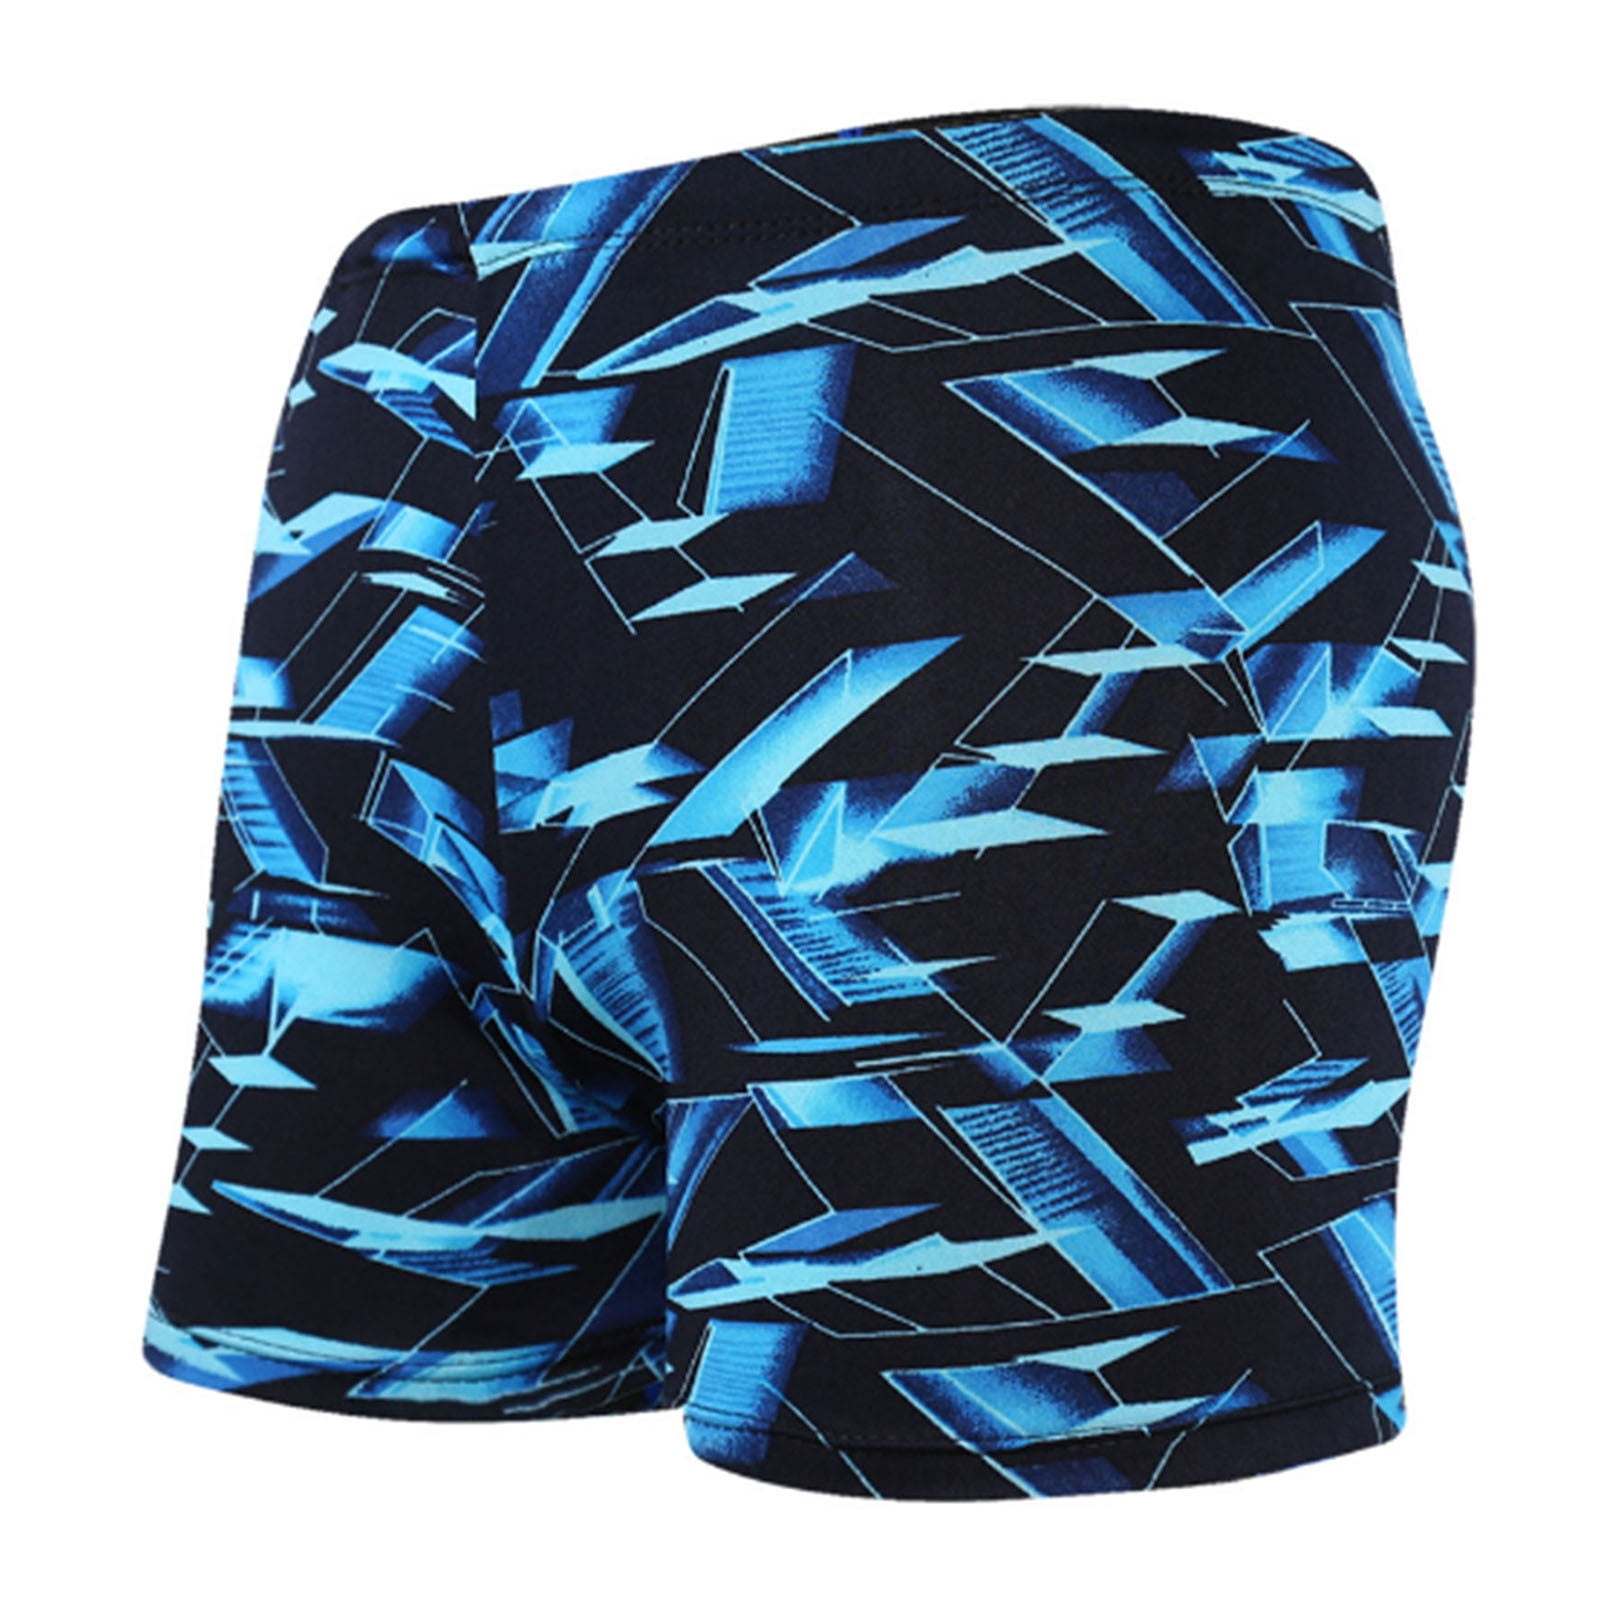 Details about   Mens Swimwear Swim Trunks Competition Training Racing Jammer Surfing Shorts 